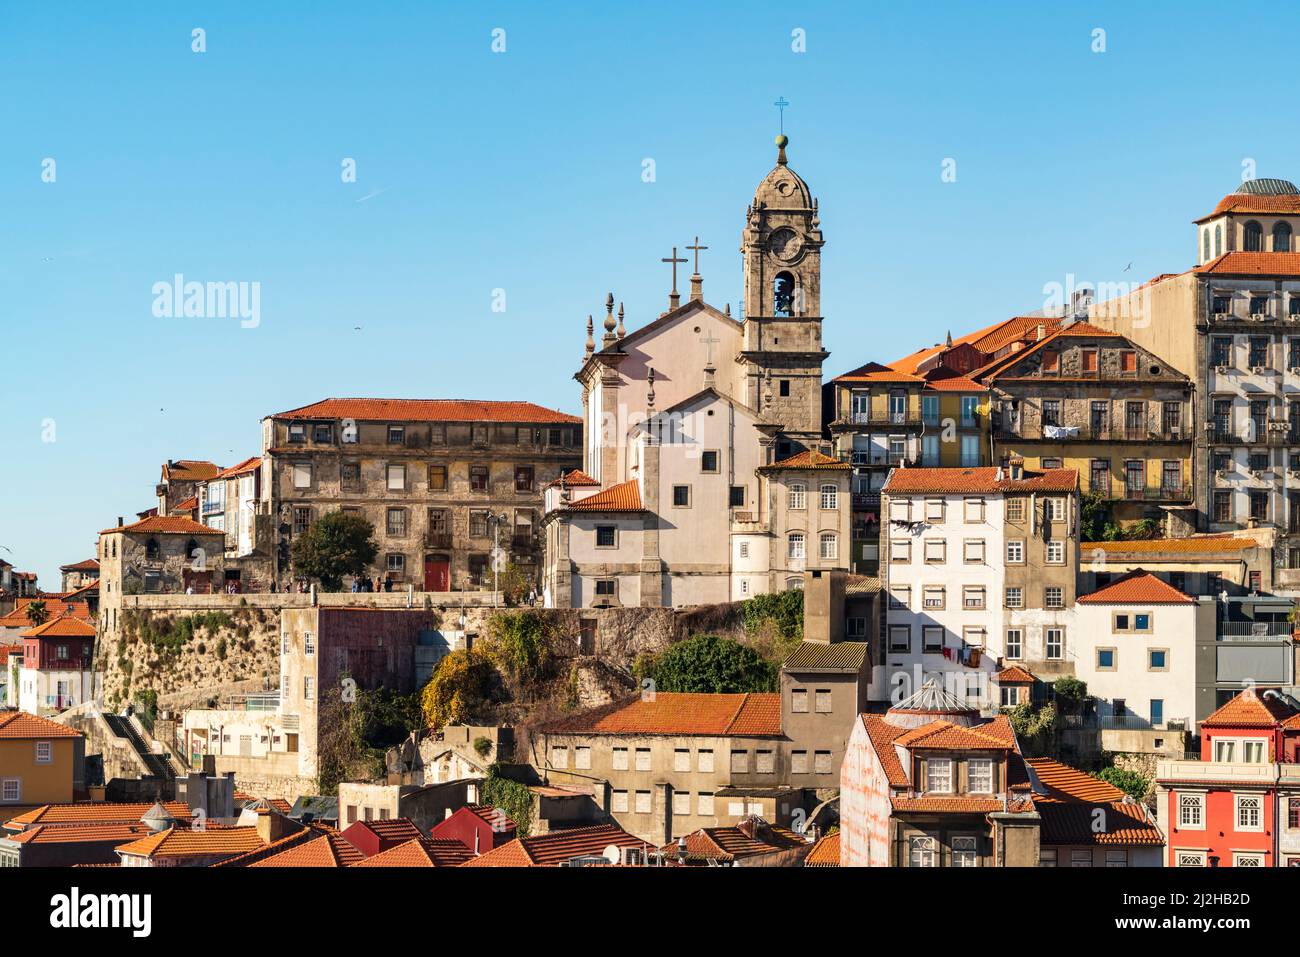 Portugal, Porto, Old town buildings Stock Photo